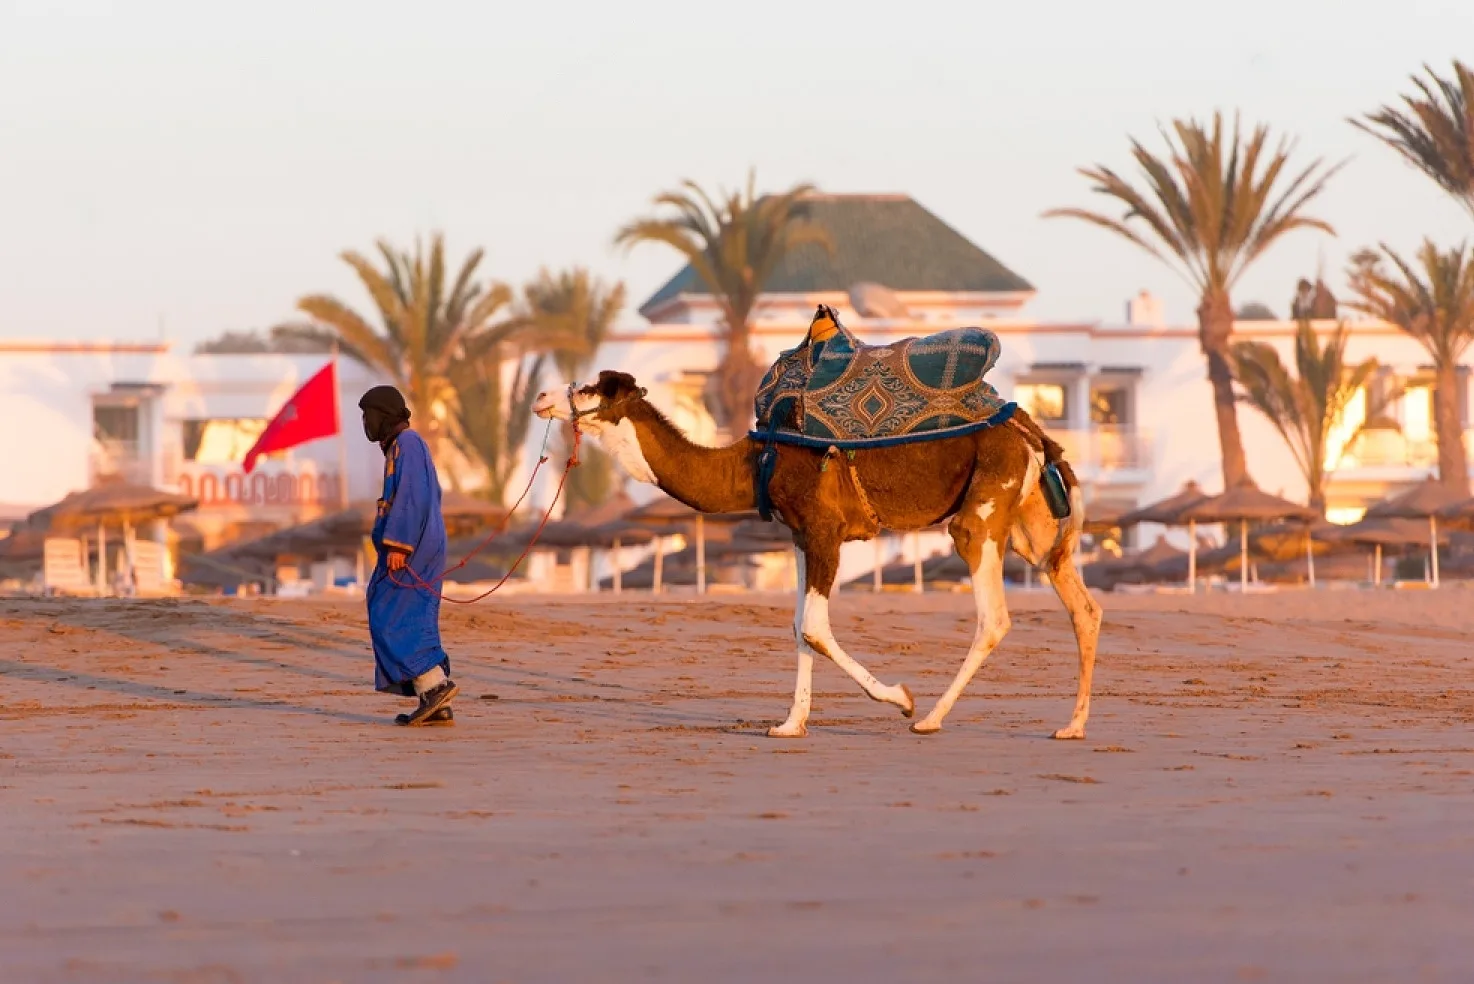 Where-to-Ride-Camels-in-Morocco-Agadir.webp